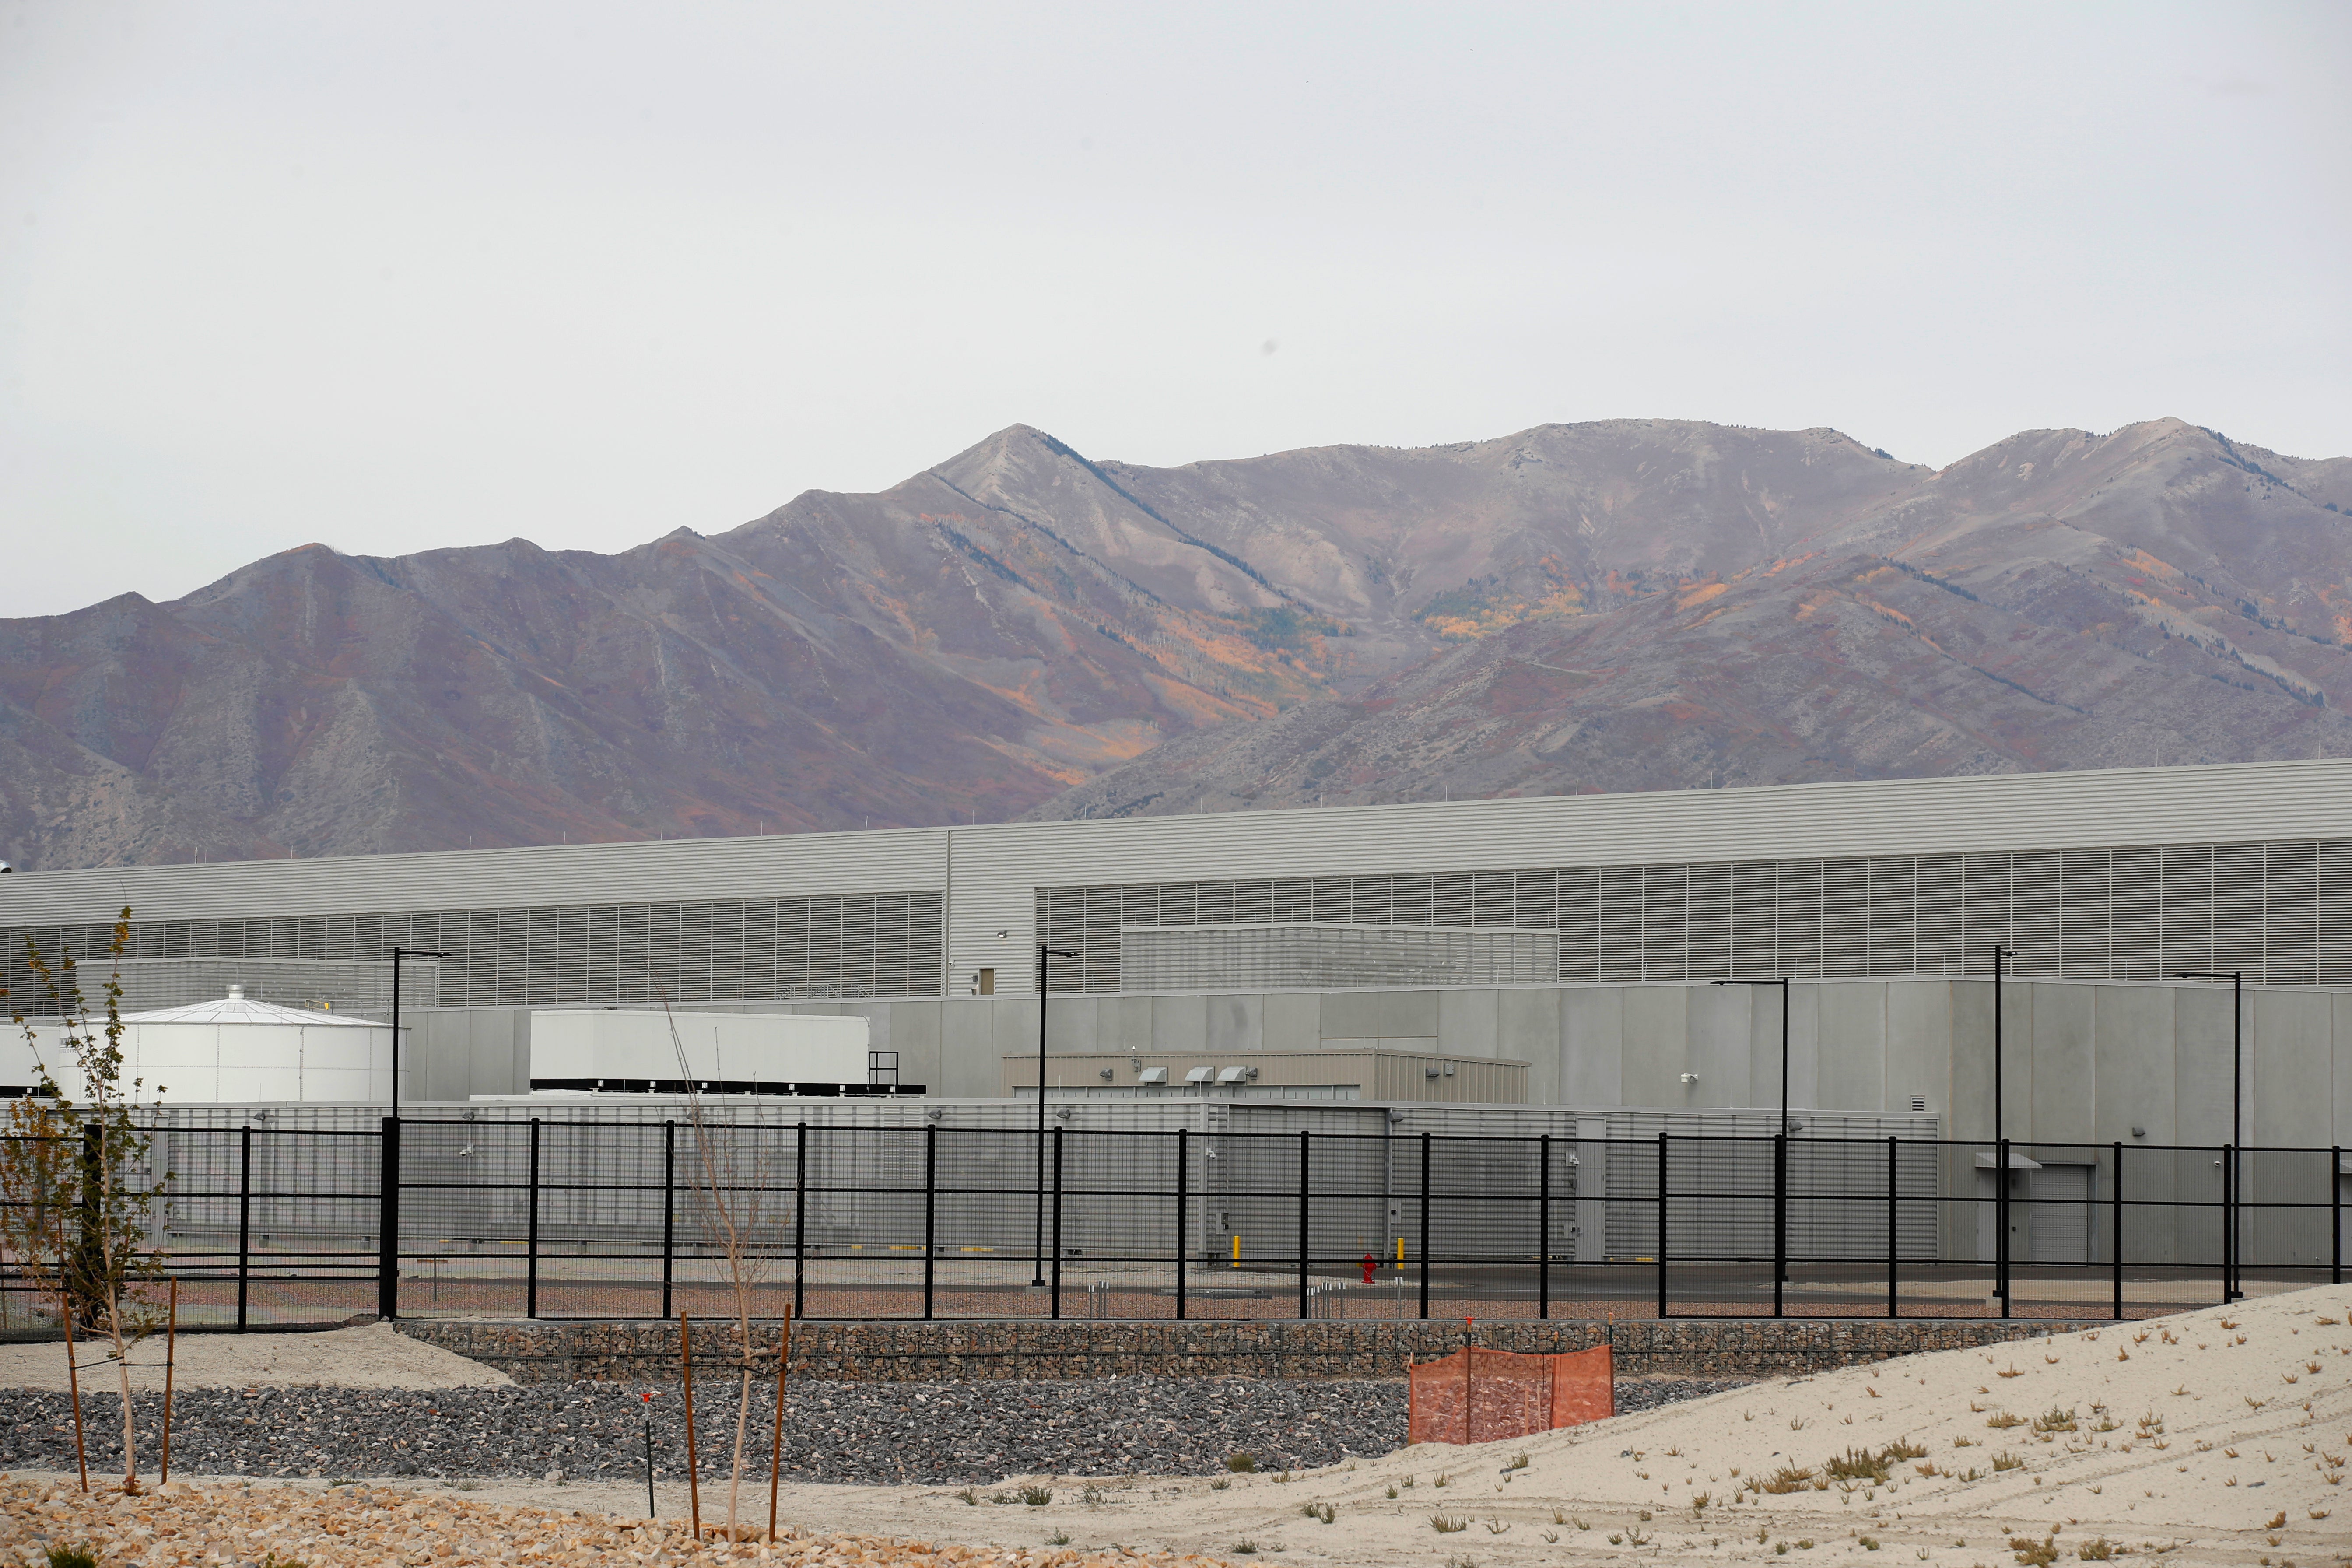 Two phases of the newly completed Facebook data centre sit at the base of mountains in the Rush Valley on 5 October 2021 in Eagle Mountain, Utah. Facebook was shut down yesterday for more than seven hours reportedly due in part to a major disruption in communication between the company's data centres